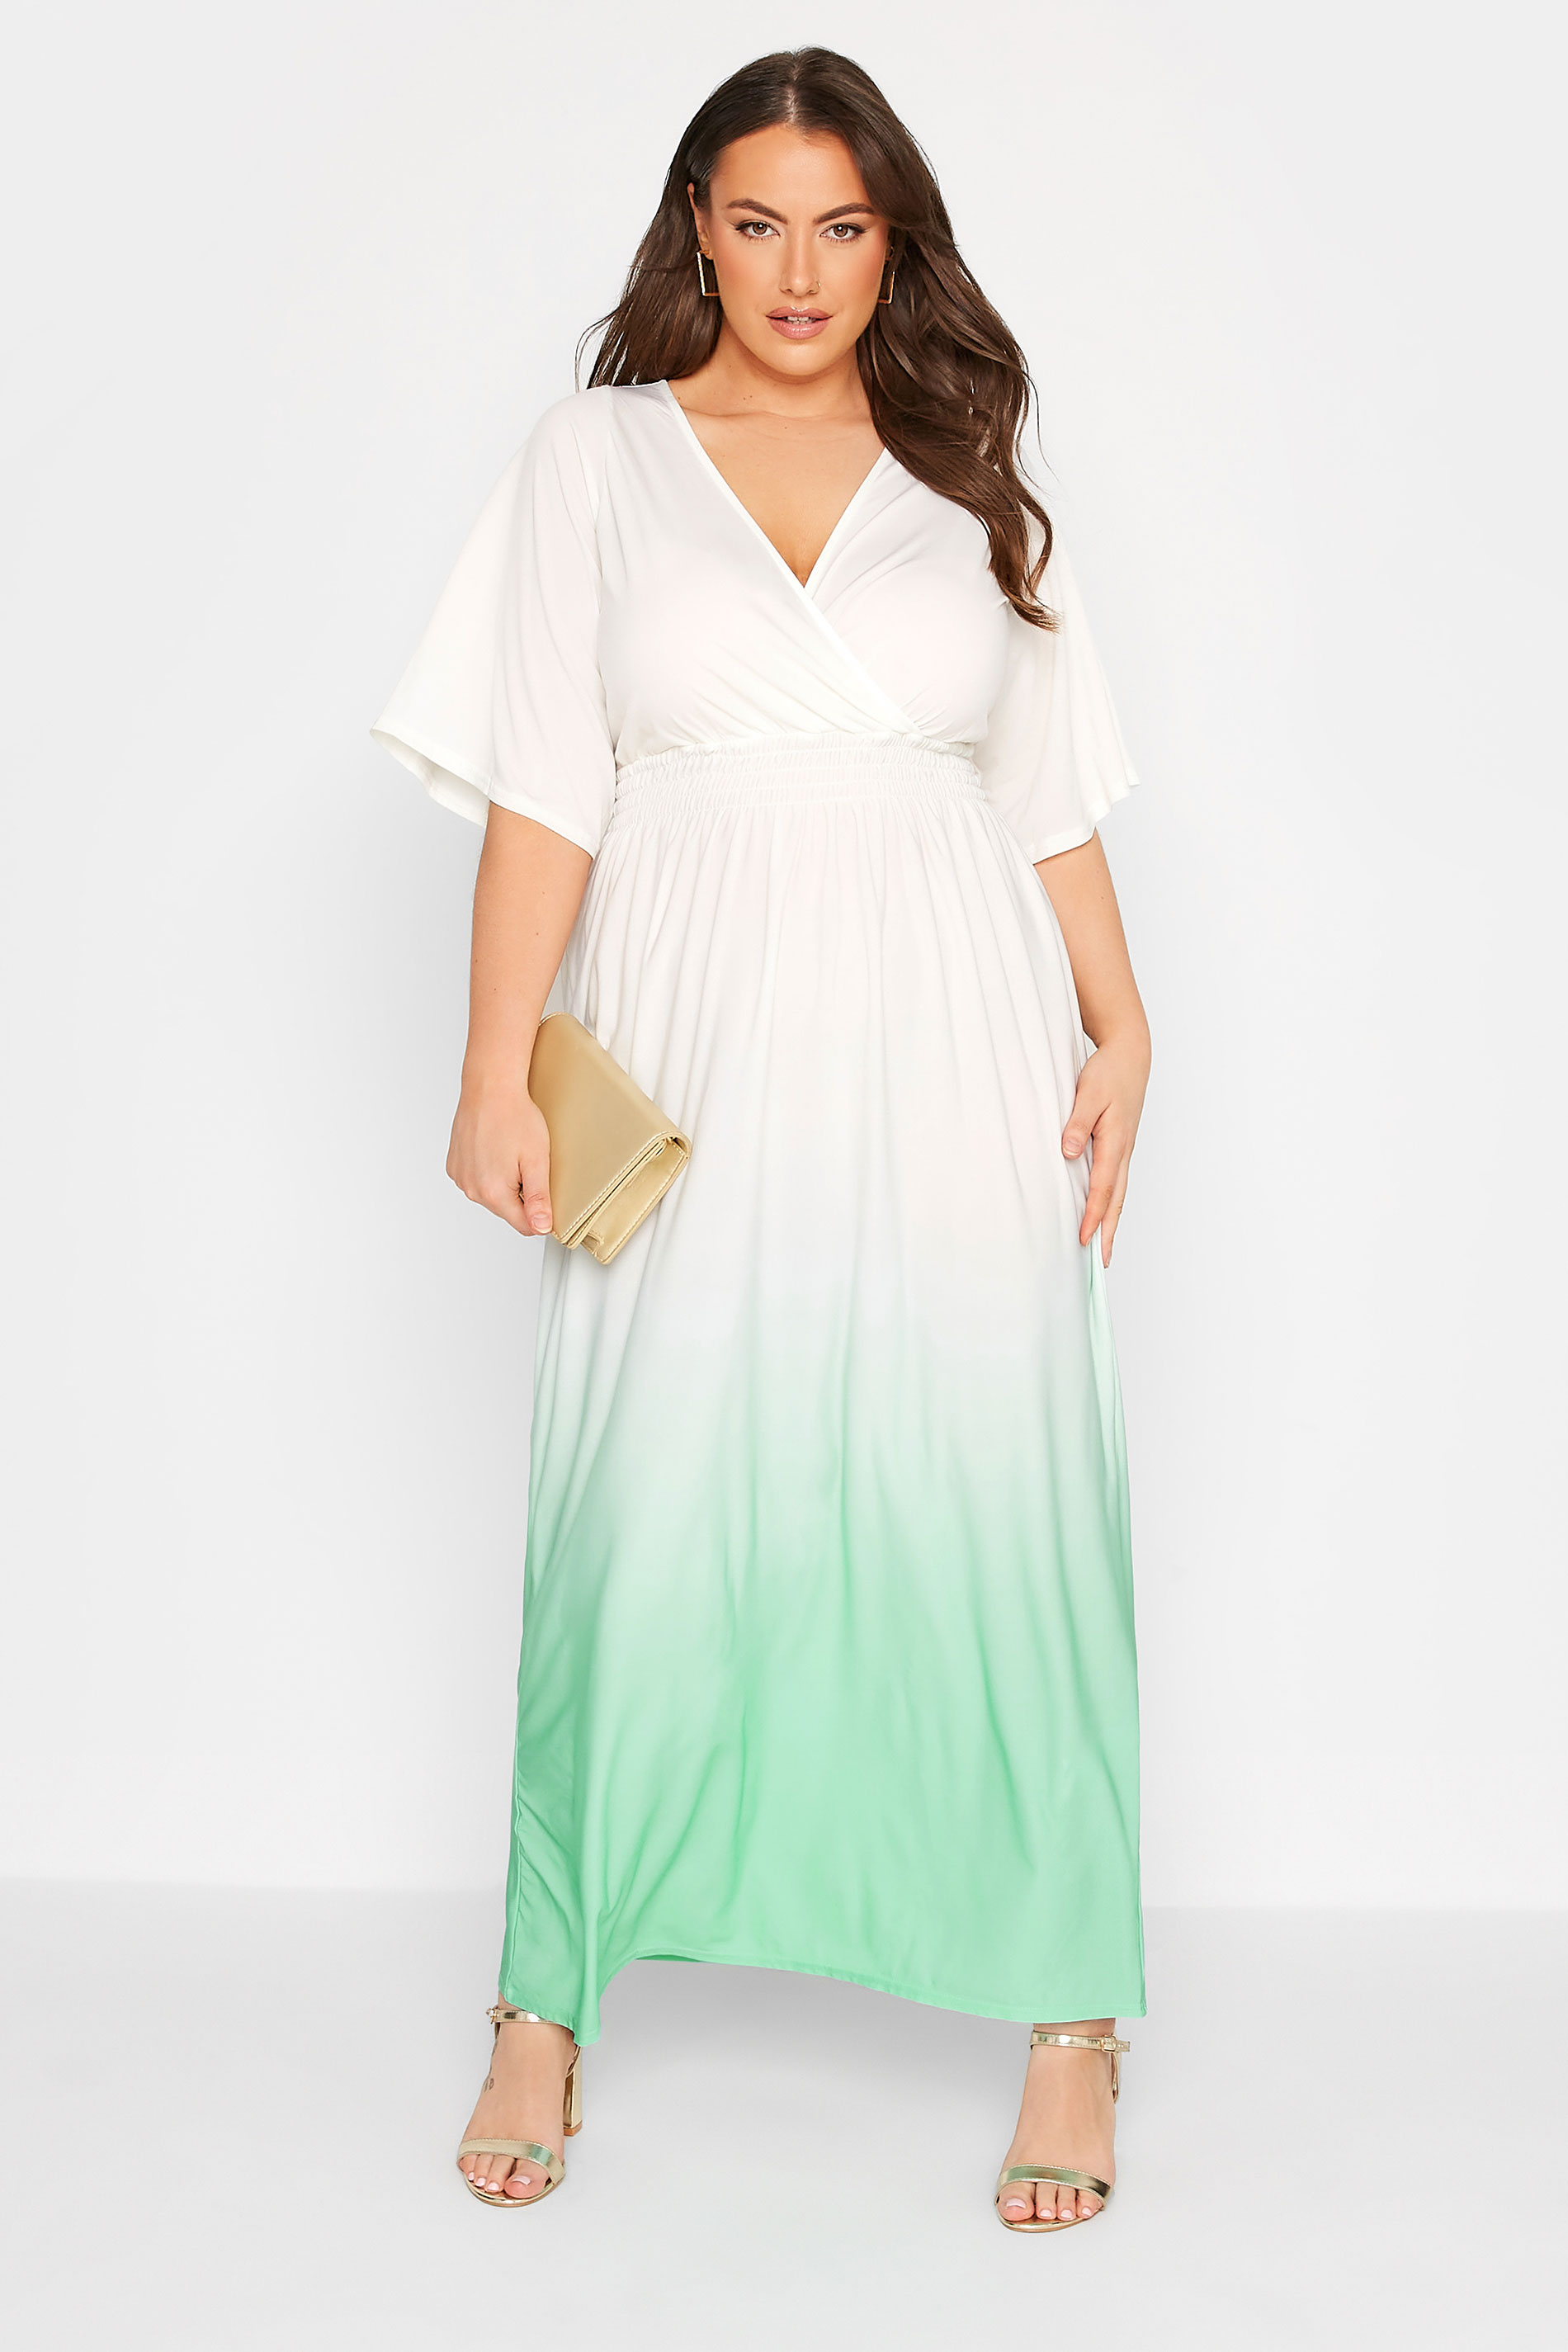 Robes Grande Taille Grande taille  Robes Longues | YOURS LONDON - Robe Blanche Maxi Ombré Vert - JO31229